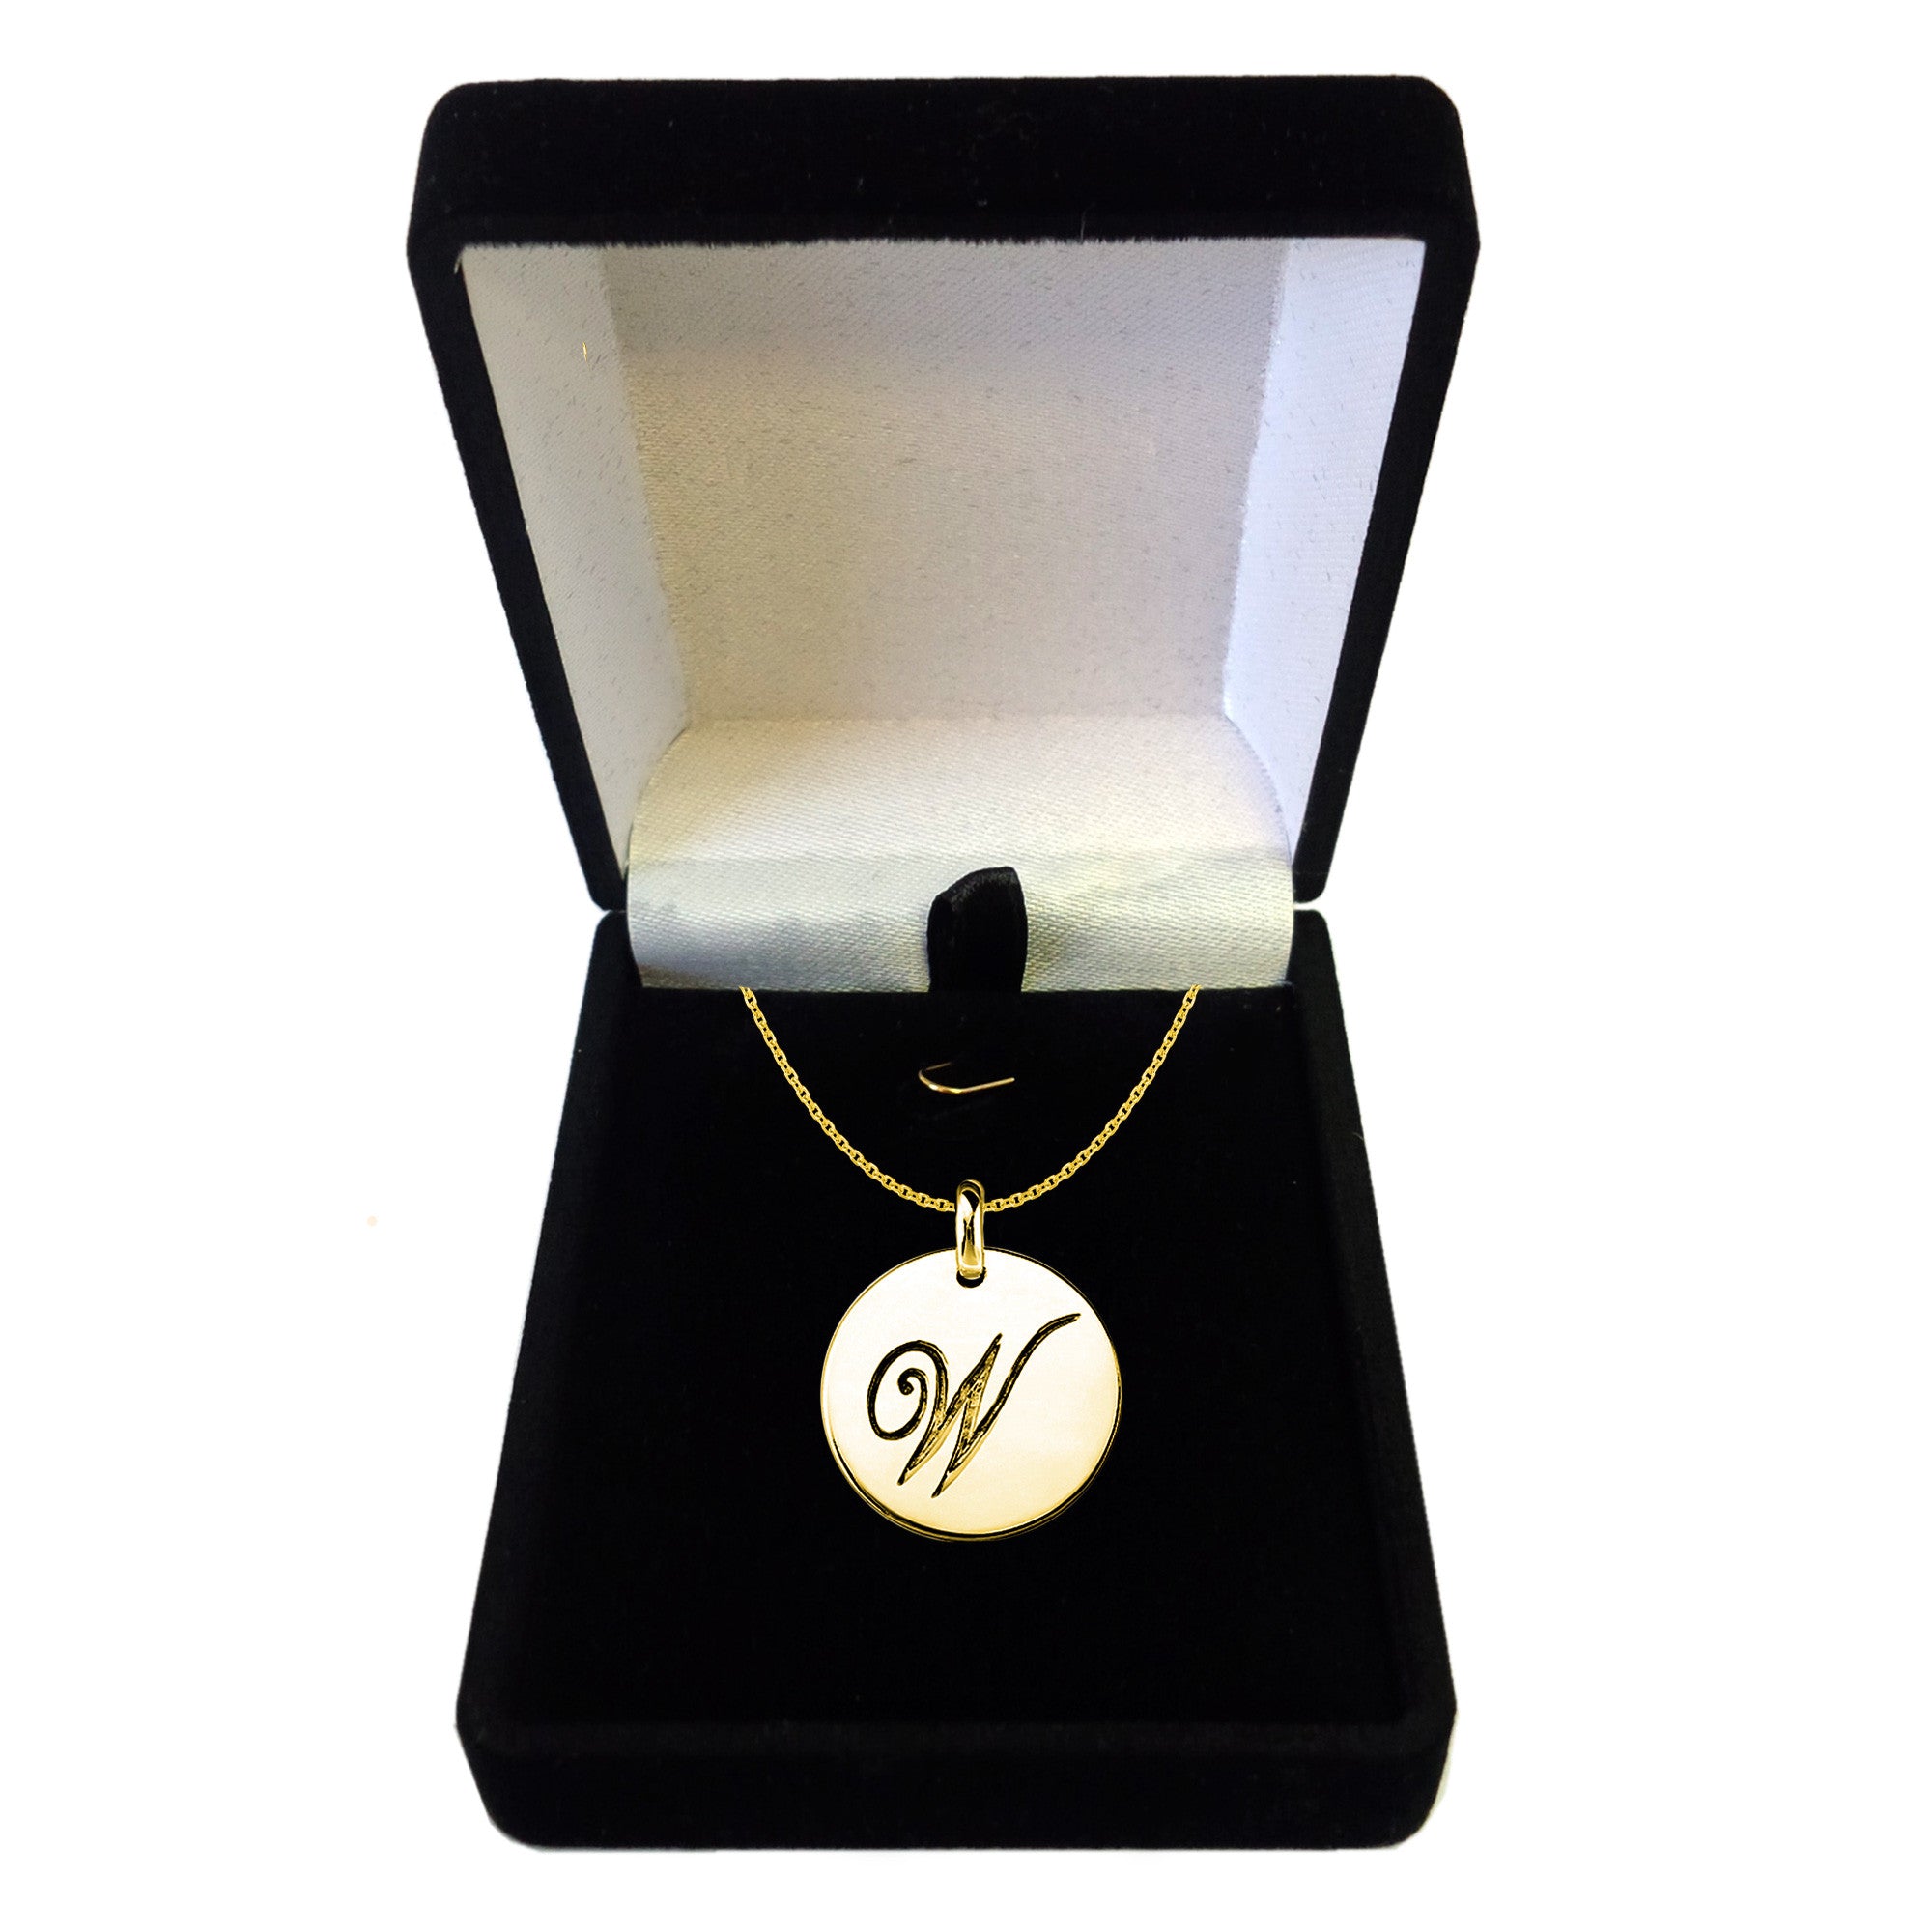 "W" 14K Yellow Gold Script Engraved Initial Disk Pendant fine designer jewelry for men and women